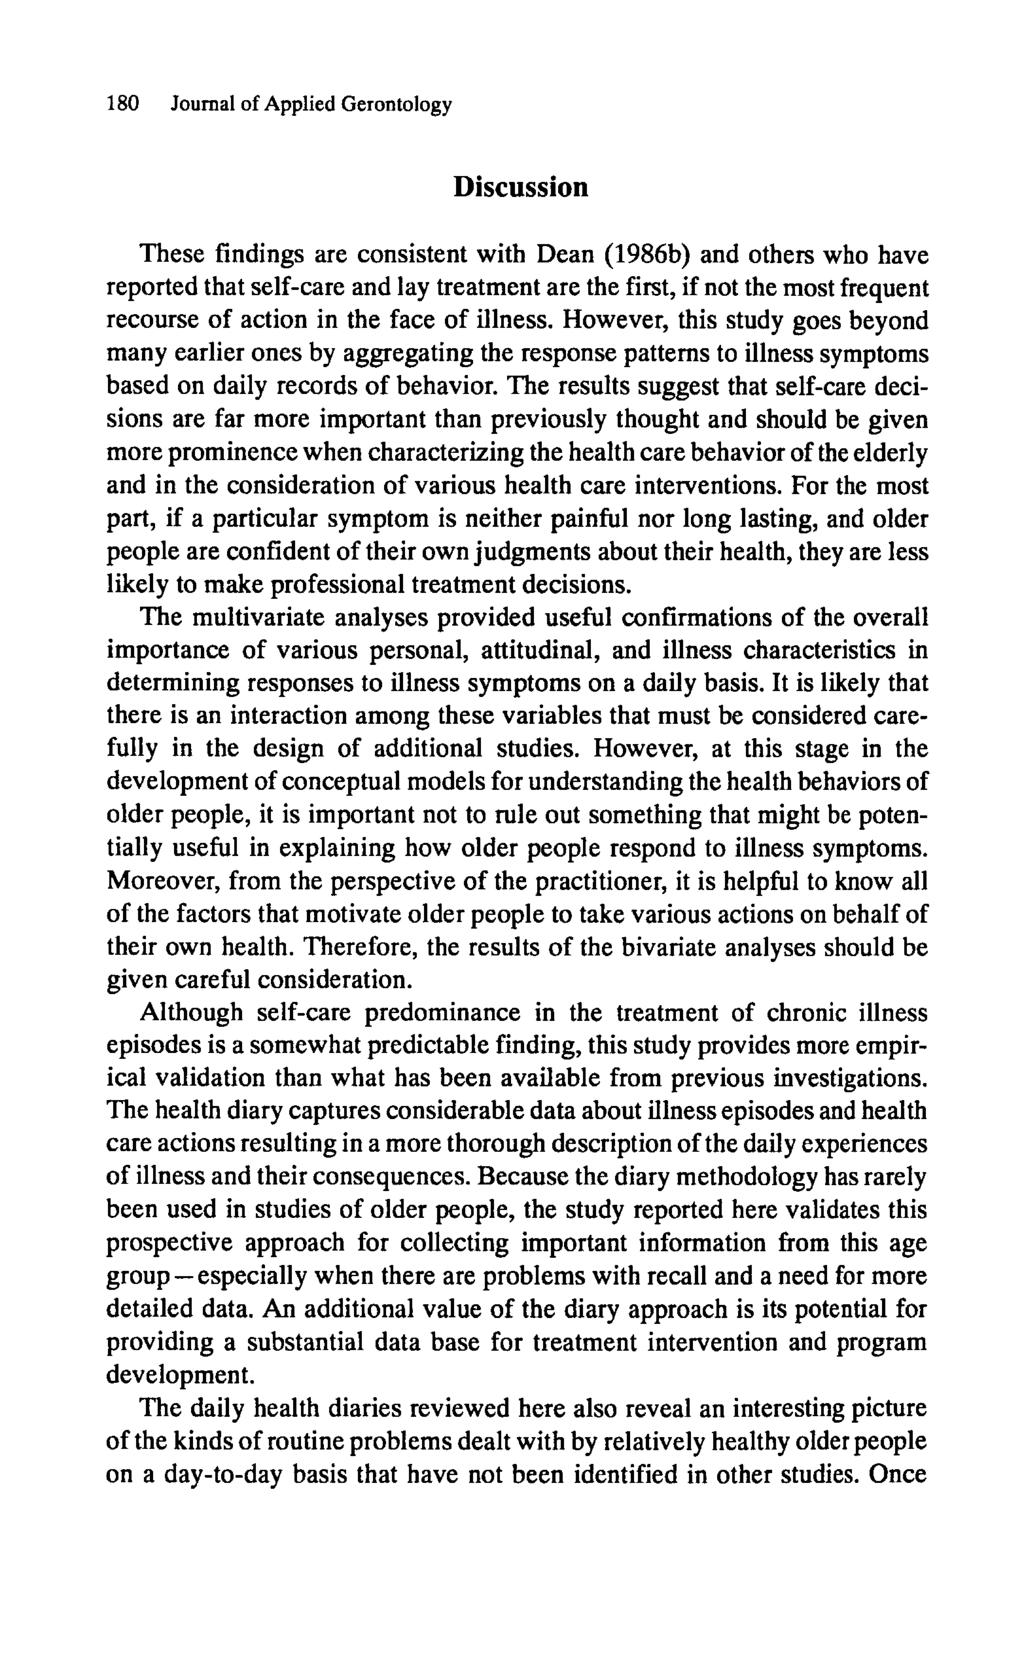 18 Disussion These findings are onsistent with Dean (1986b) and others who have reported that self-are and lay treatment are the first, if not the most frequent reourse of ation in the fae of illness.